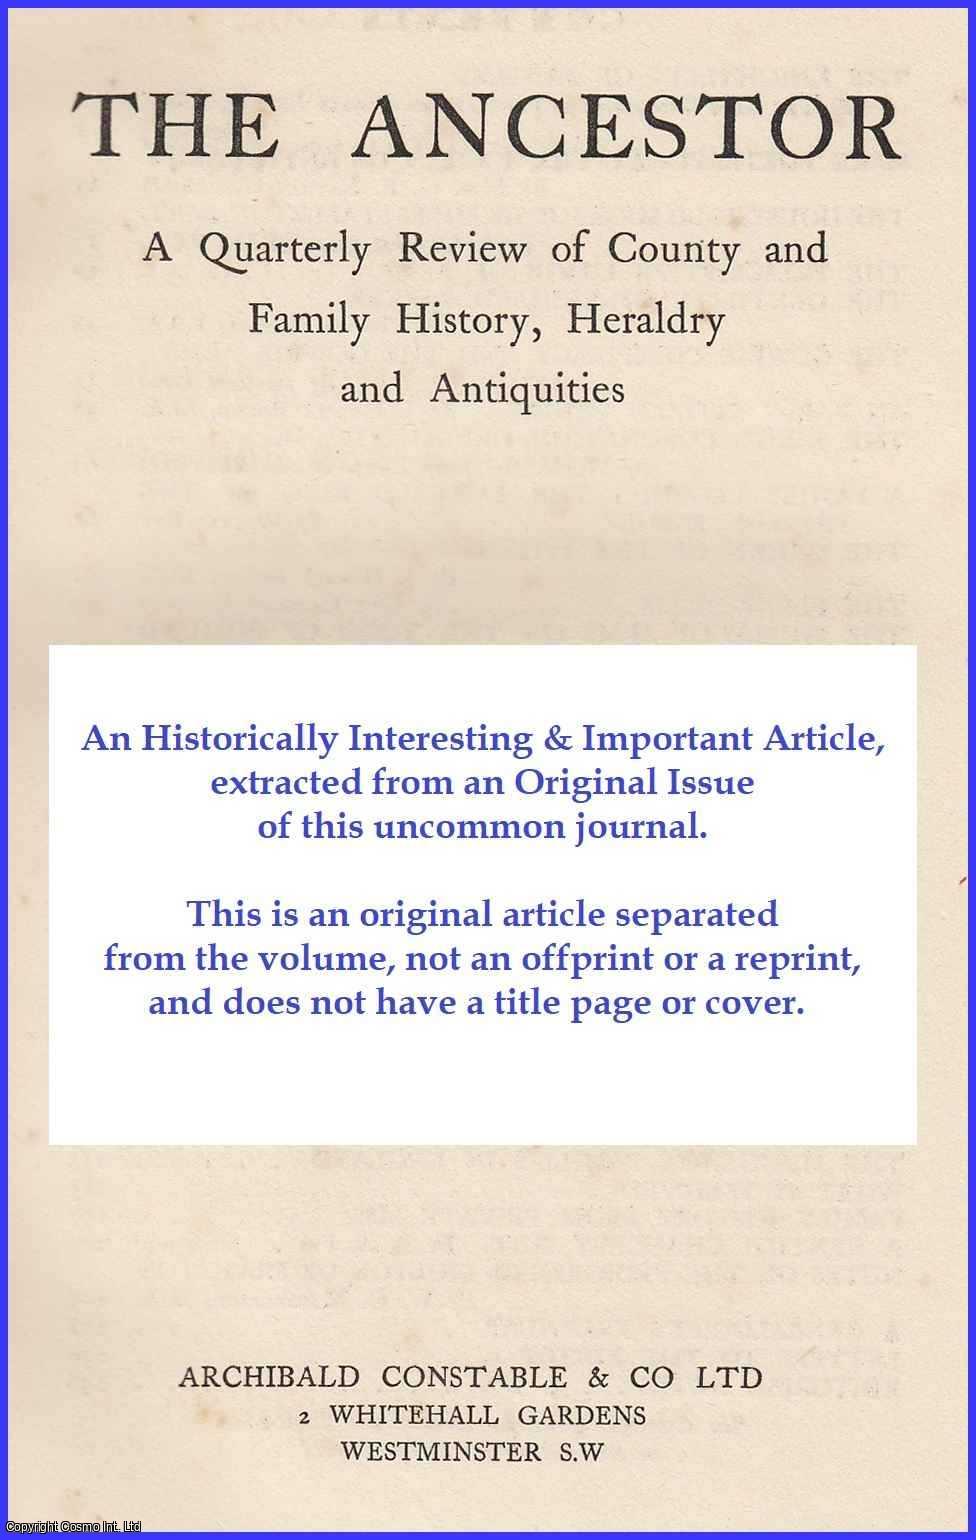 A. F. HERFORD - The Hereford Family Of Plymouth. An original article from The Ancestor, a Quarterly Review of County & Family History, Heraldry and Antiquities, 1903.